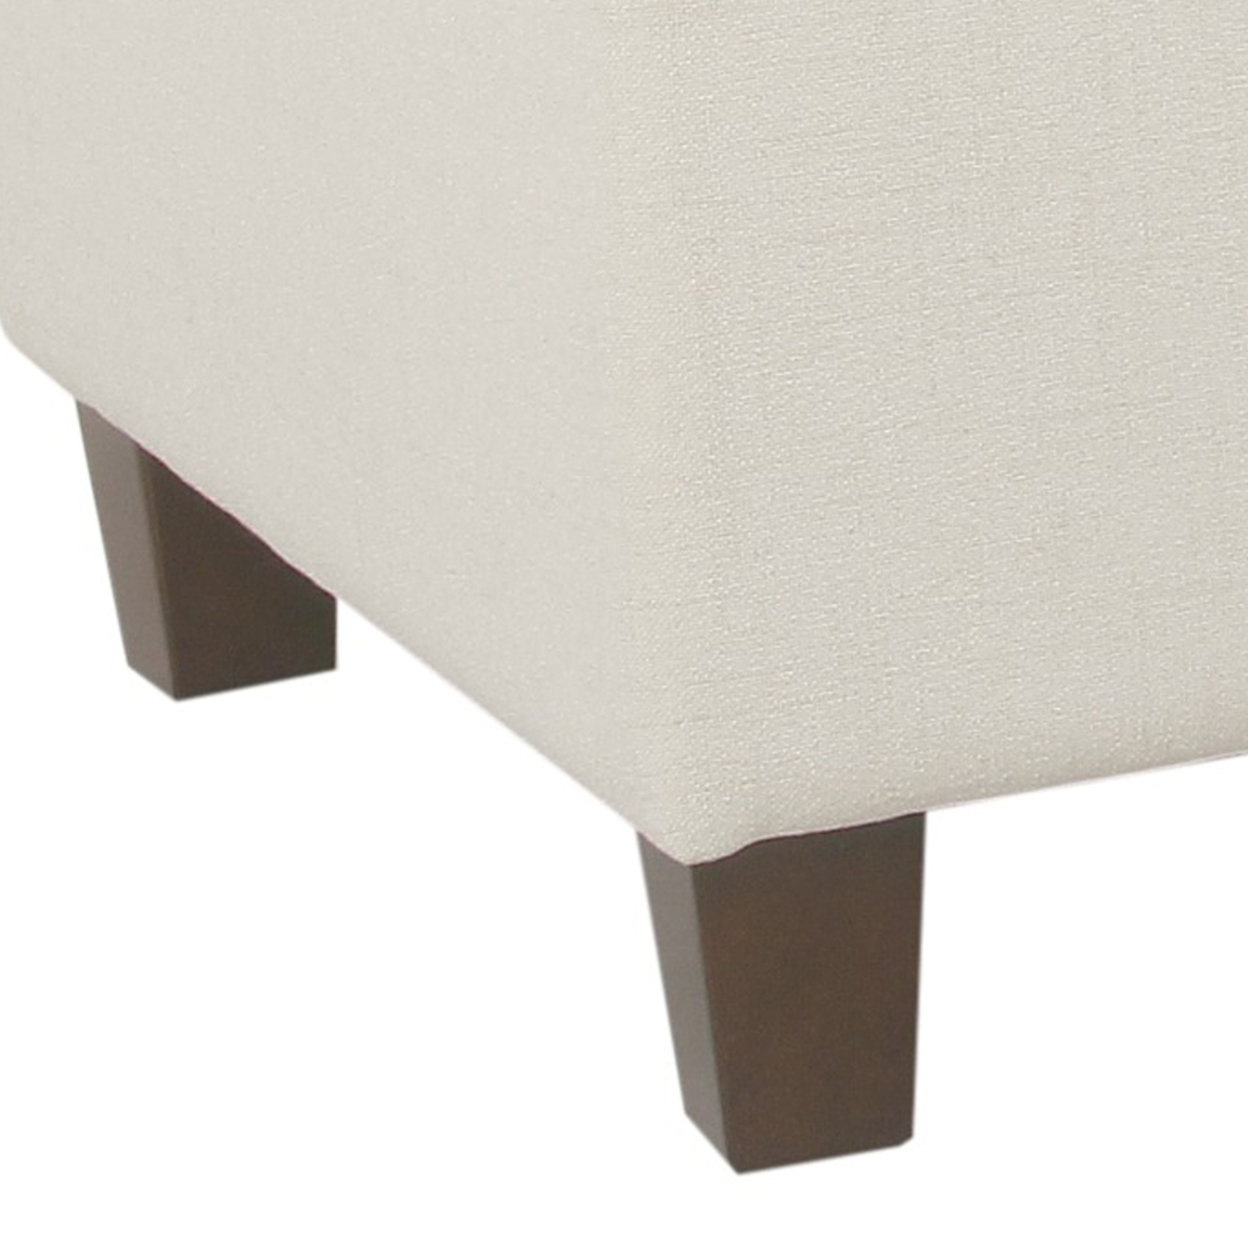 Fabric Upholstered Button Tufted Wooden Bench With Hinged Storage, White And Brown- Saltoro Sherpi